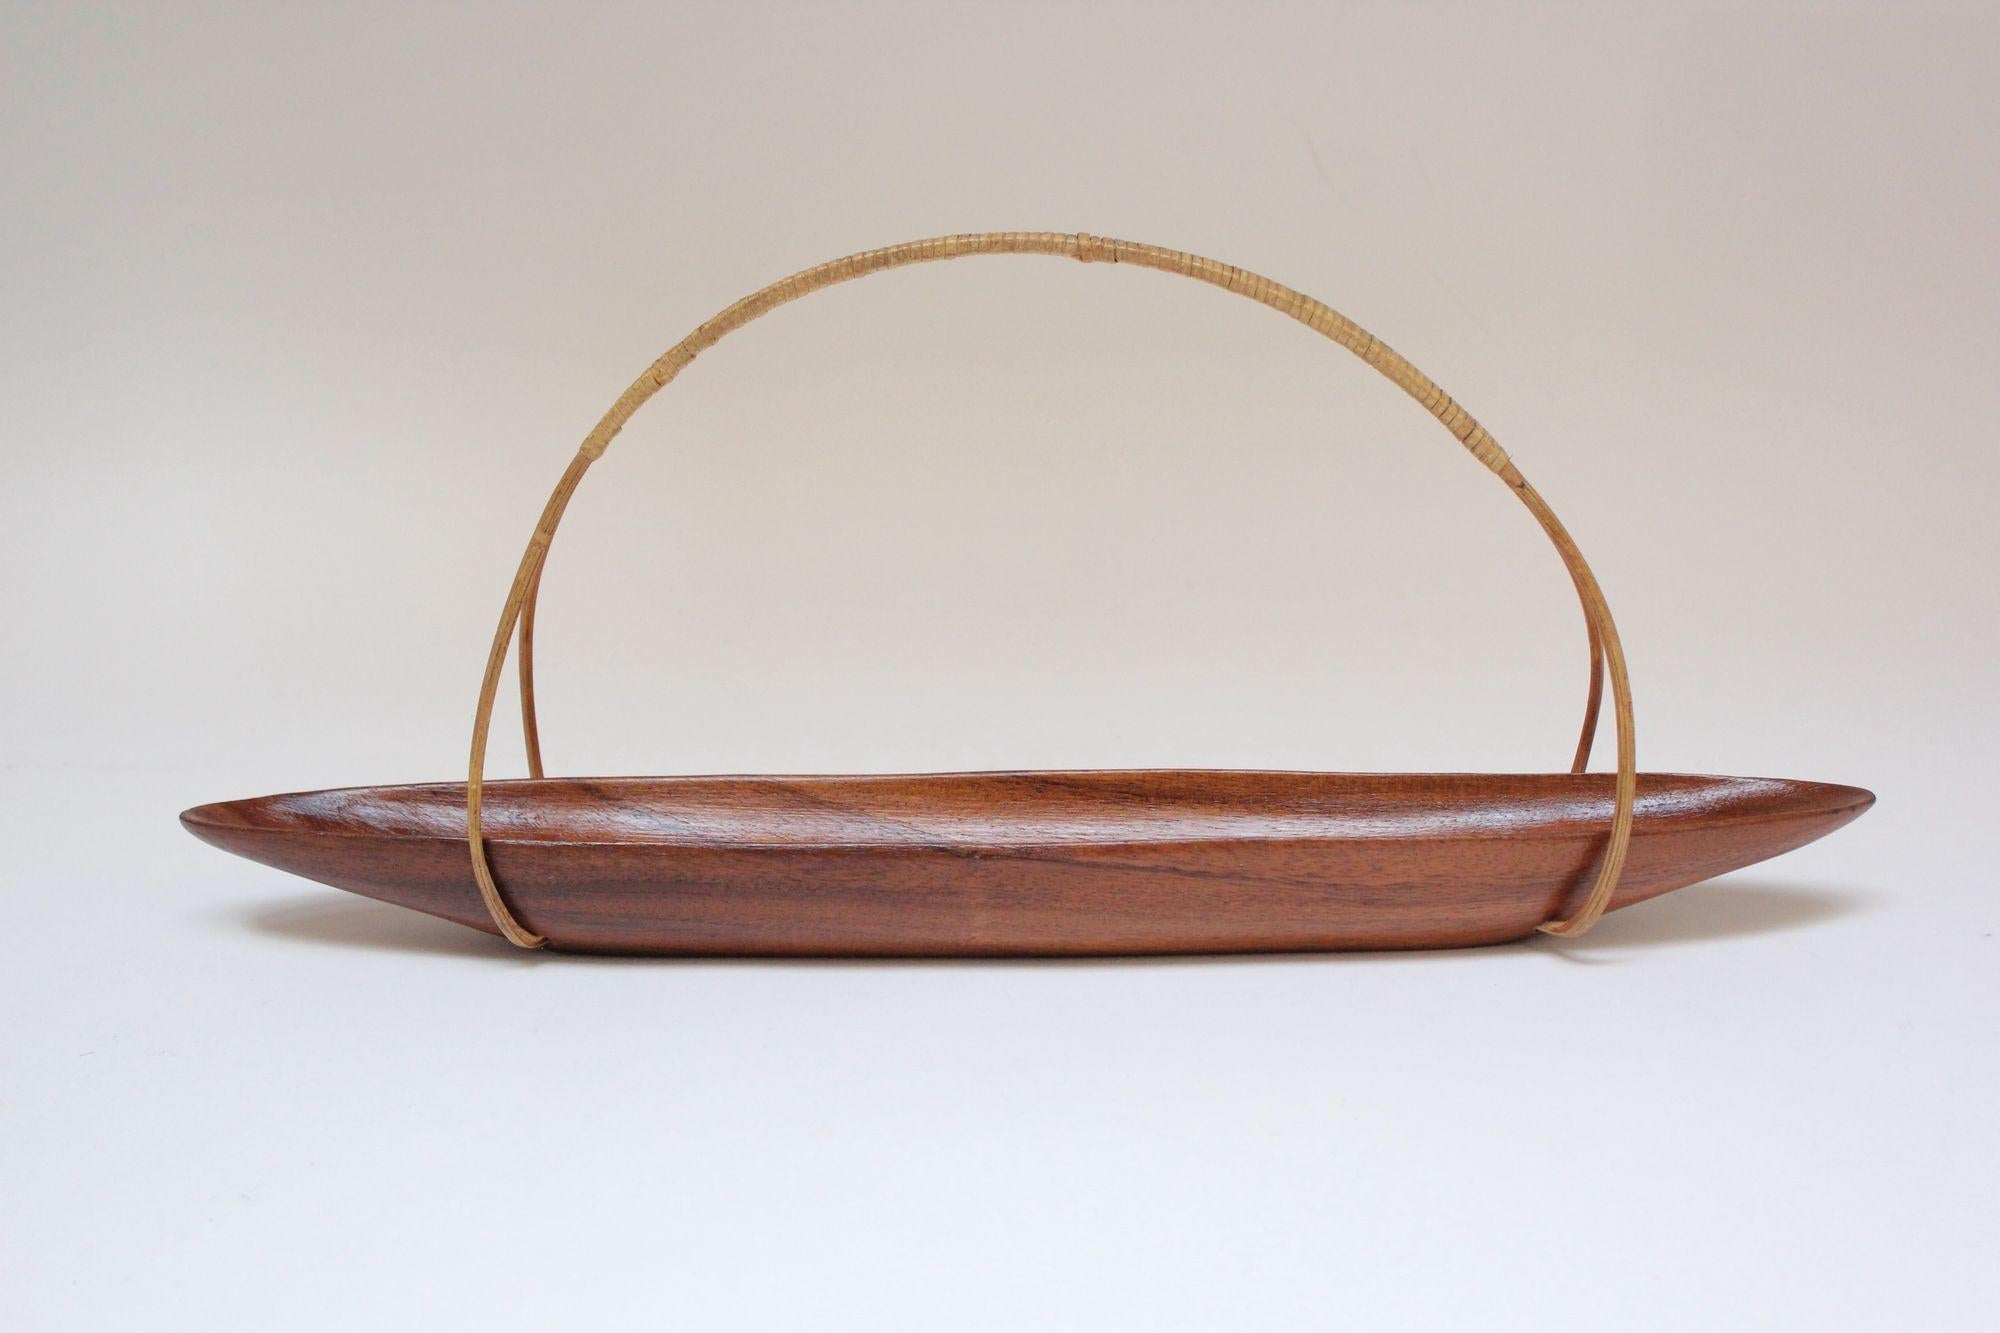 Stylish boat-shaped decorative bowl in teak with hooped, wicker handle (ca. 1960s, Denmark).
Narrow, long shape ideal for displaying lemons, limes or other similarly shaped/sized items.
Branded 